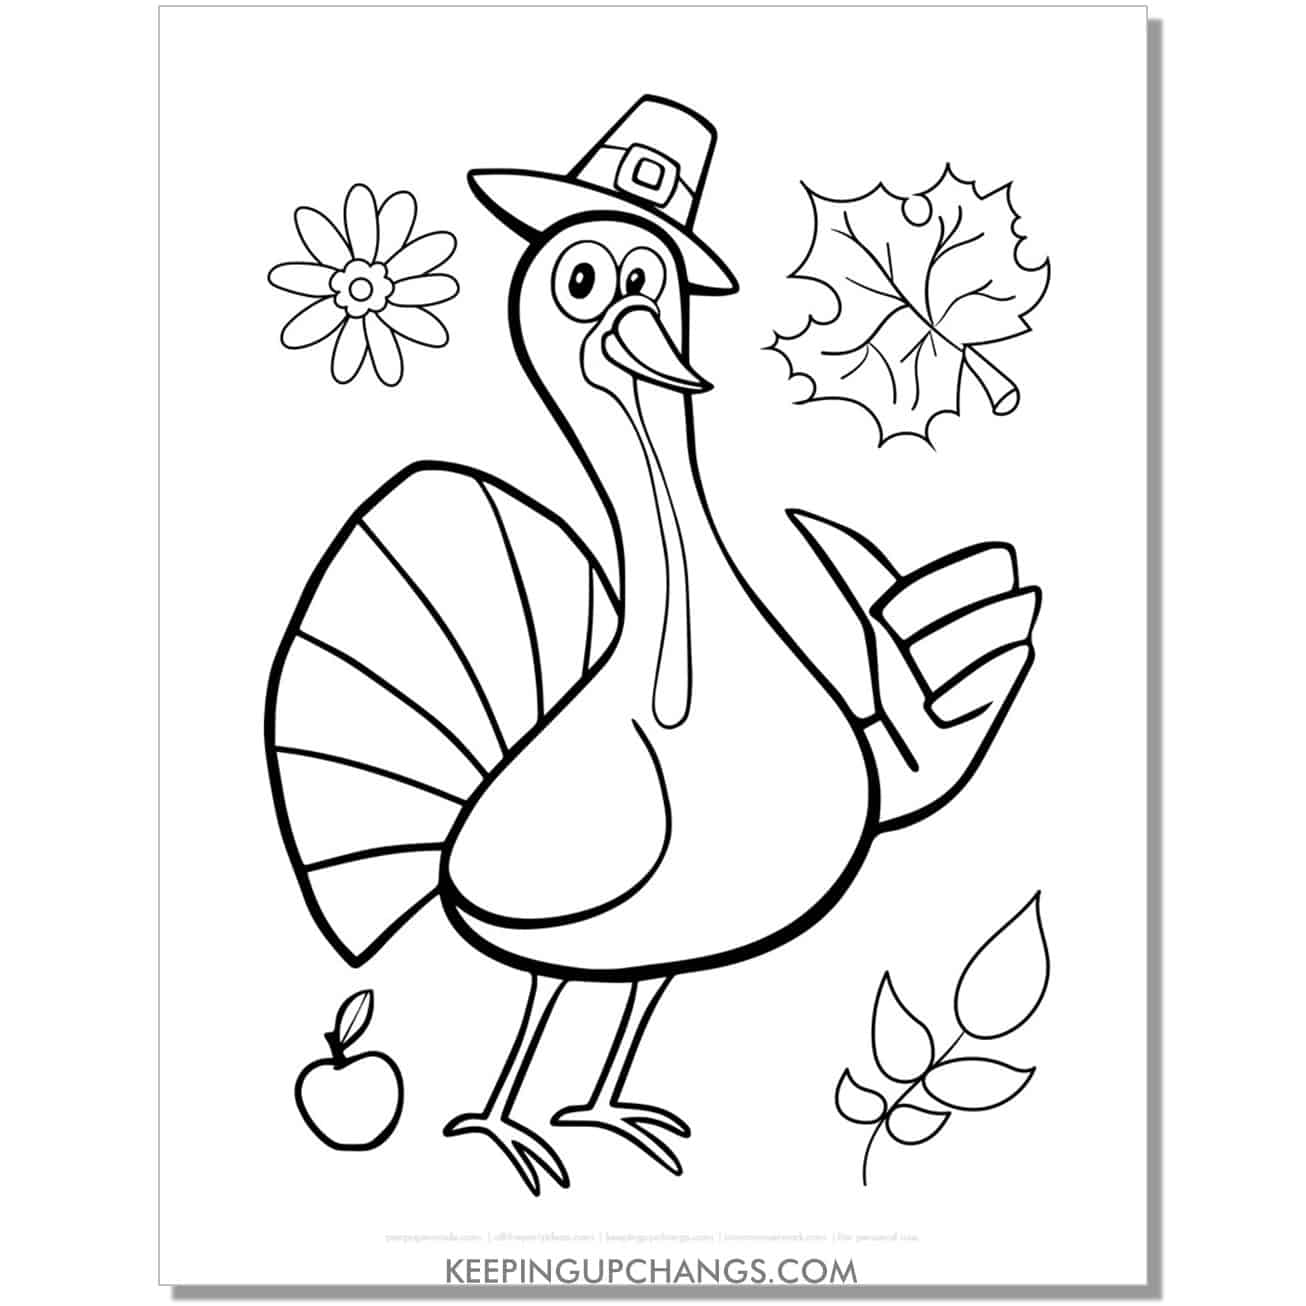 free pilgrim turkey coloring page for fall, thanksgiving.